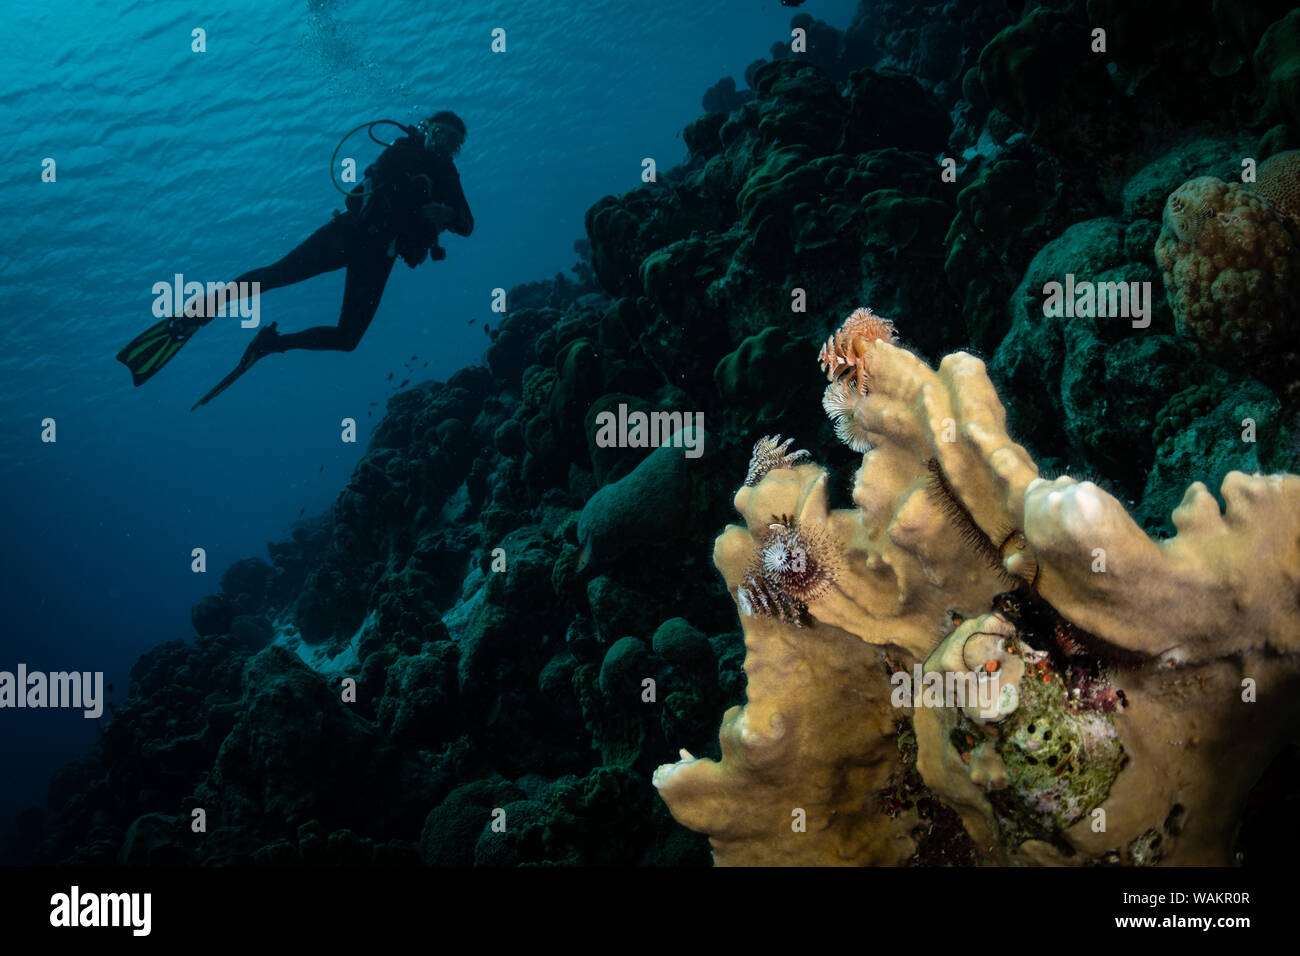 Diver explores the corals on the reef in Bonaire, Netherlands Antilles Stock Photo